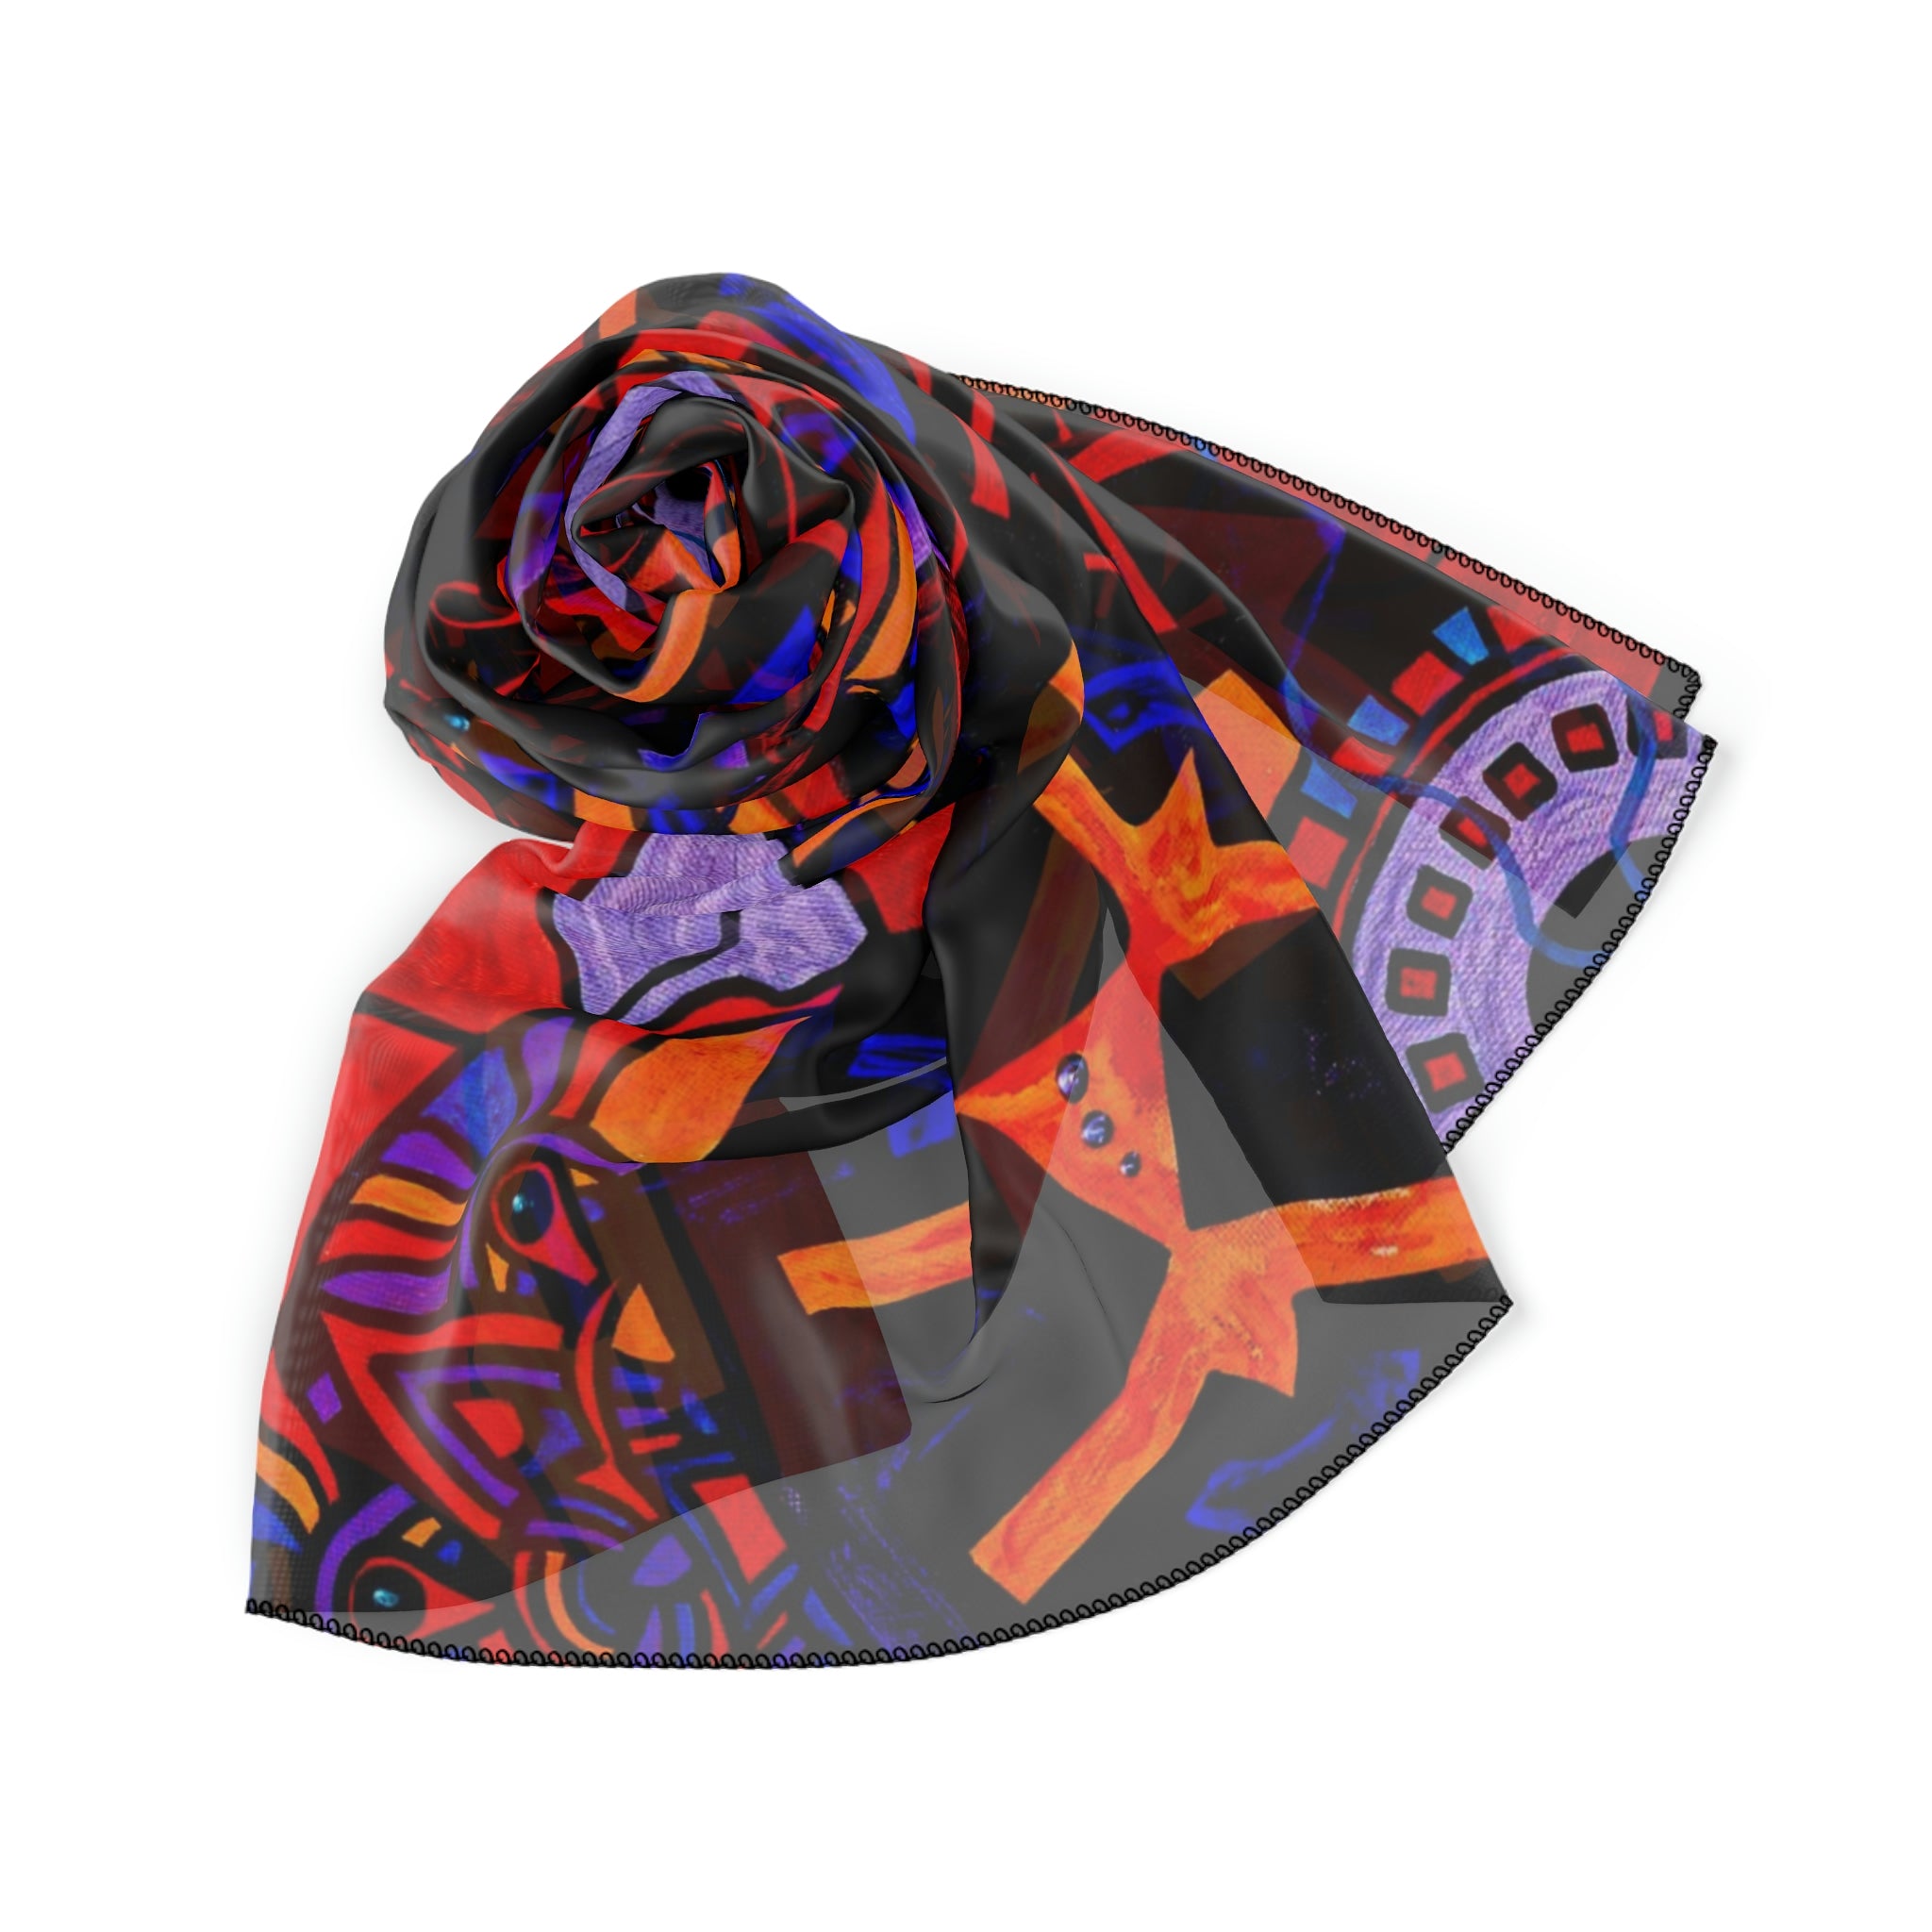 get-the-official-alnilam-strength-grid-frequency-scarf-online-sale_10.jpg